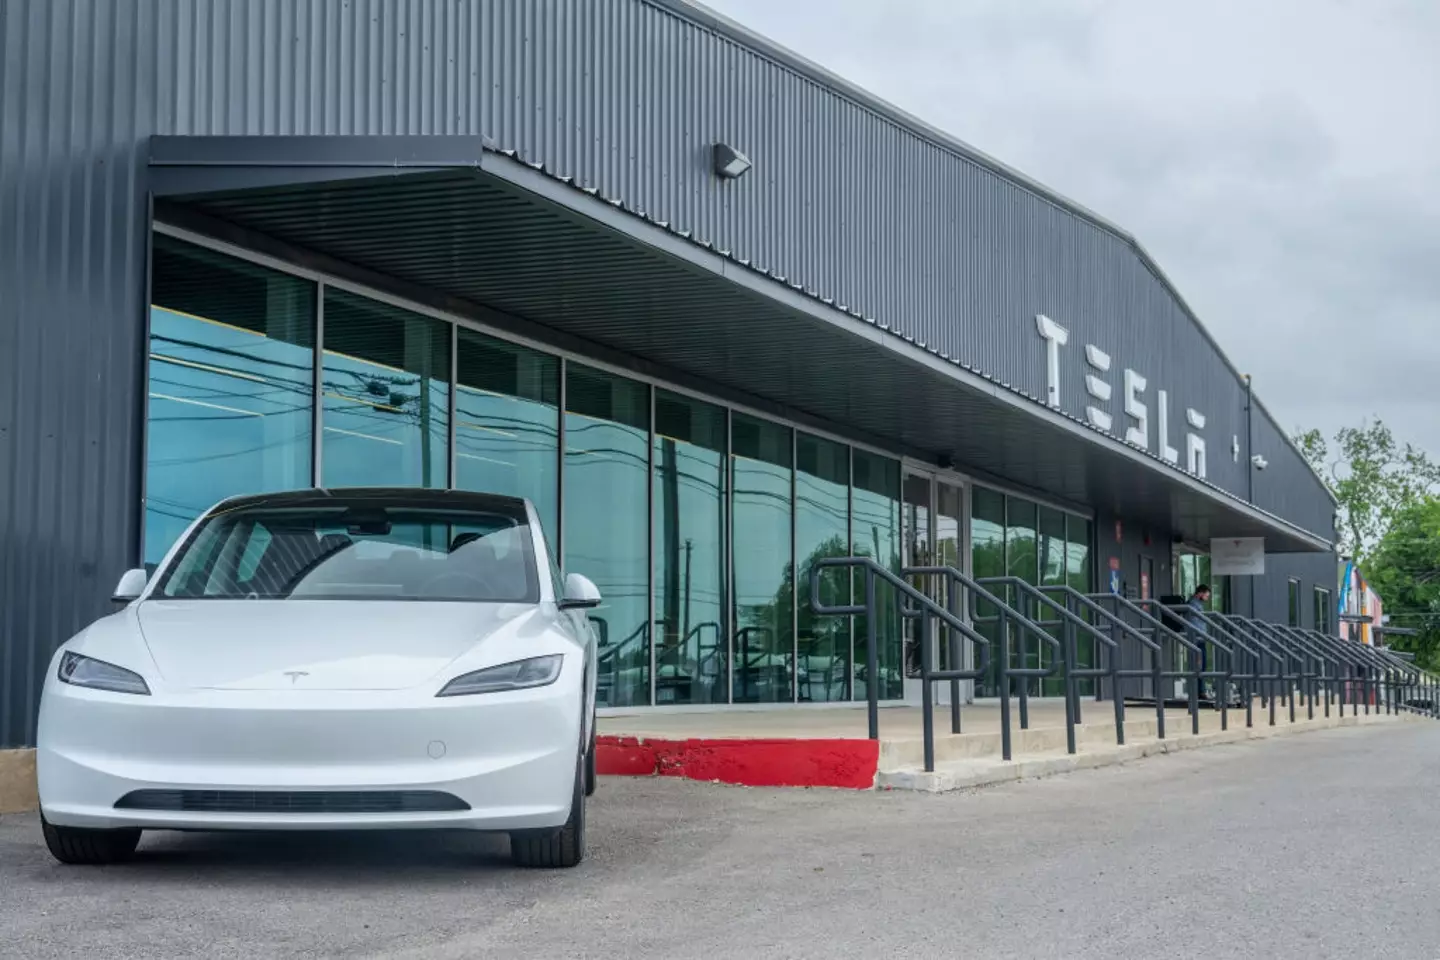 A woman has claimed that driving her Tesla left her unwell (Brandon Bell/Getty Images)